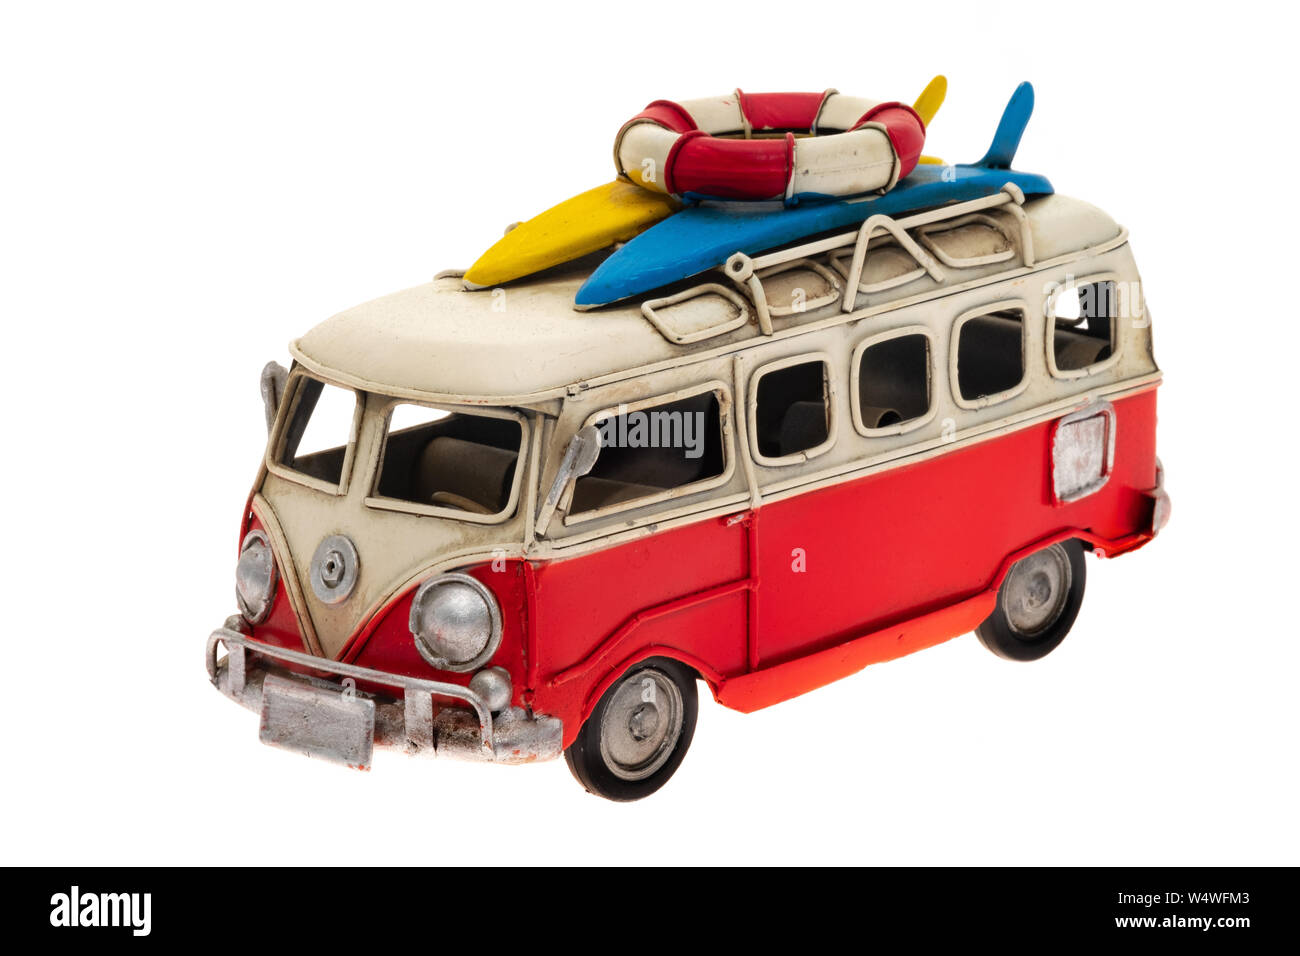 Vw camper van Cut Out Stock Images & Pictures - Alamy